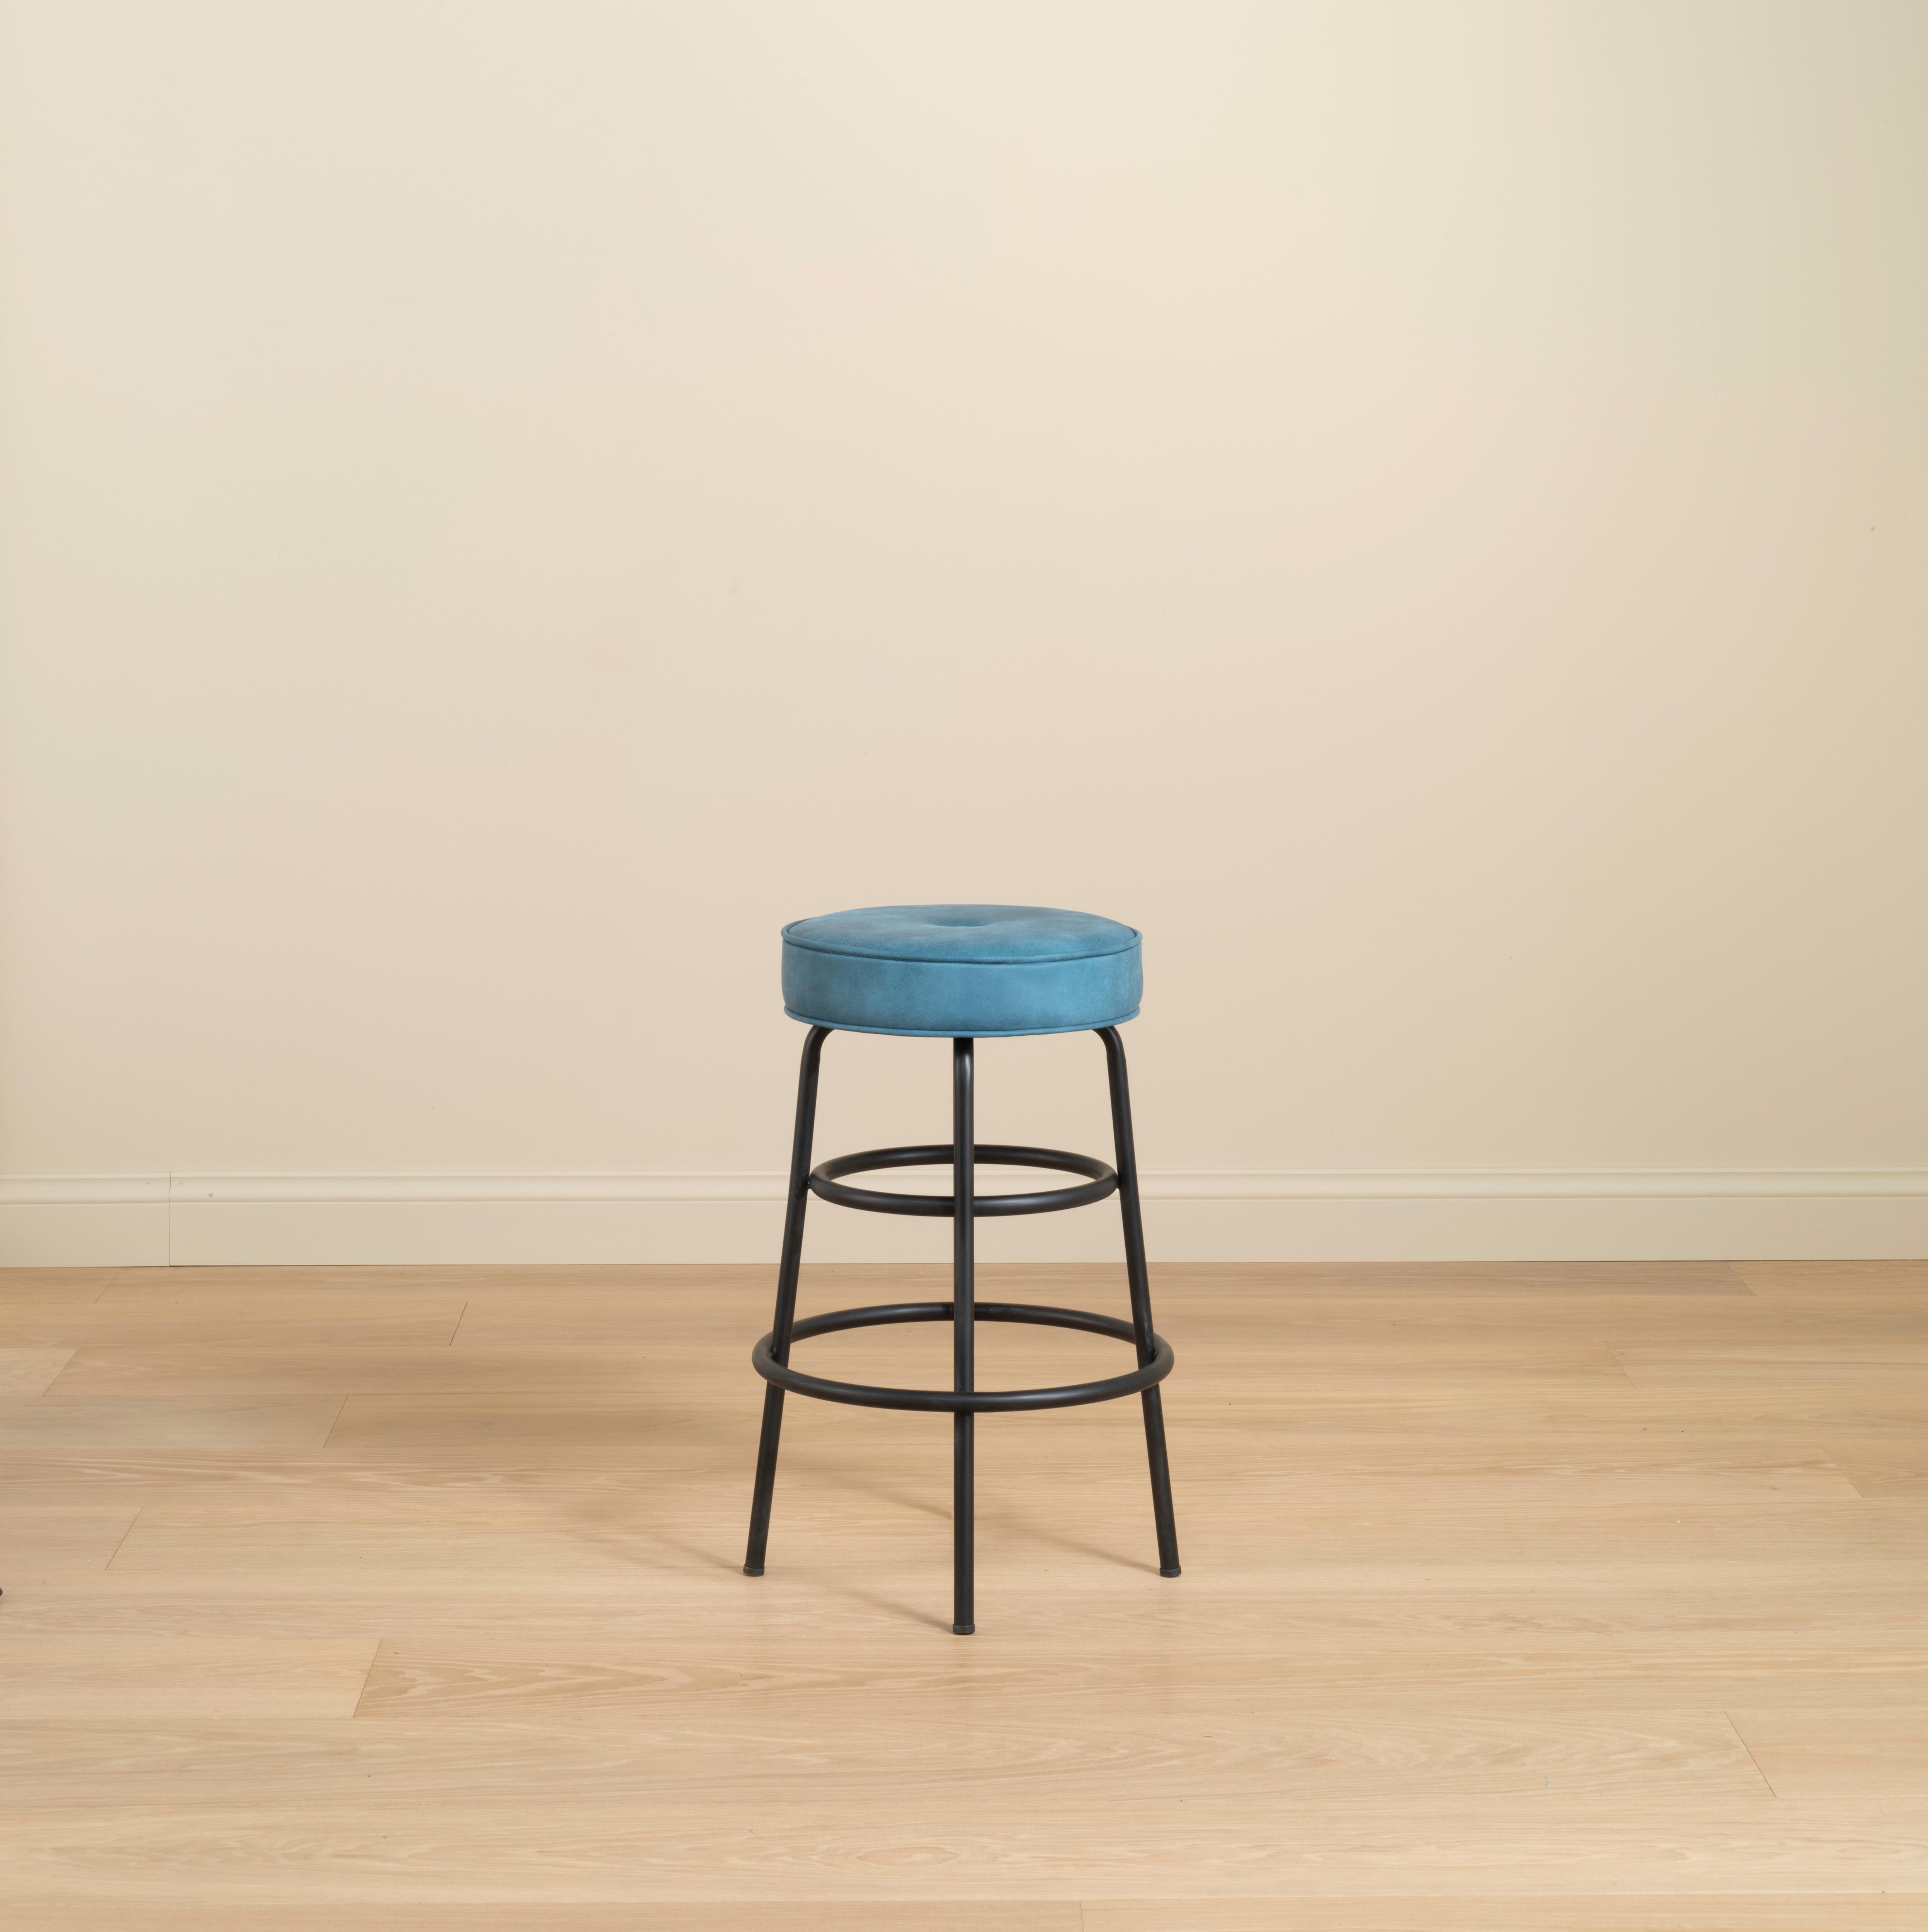 Contemporary Rupert Bevan Hoop Barstool (in Customer's Own choice of Material/Leather) For Sale